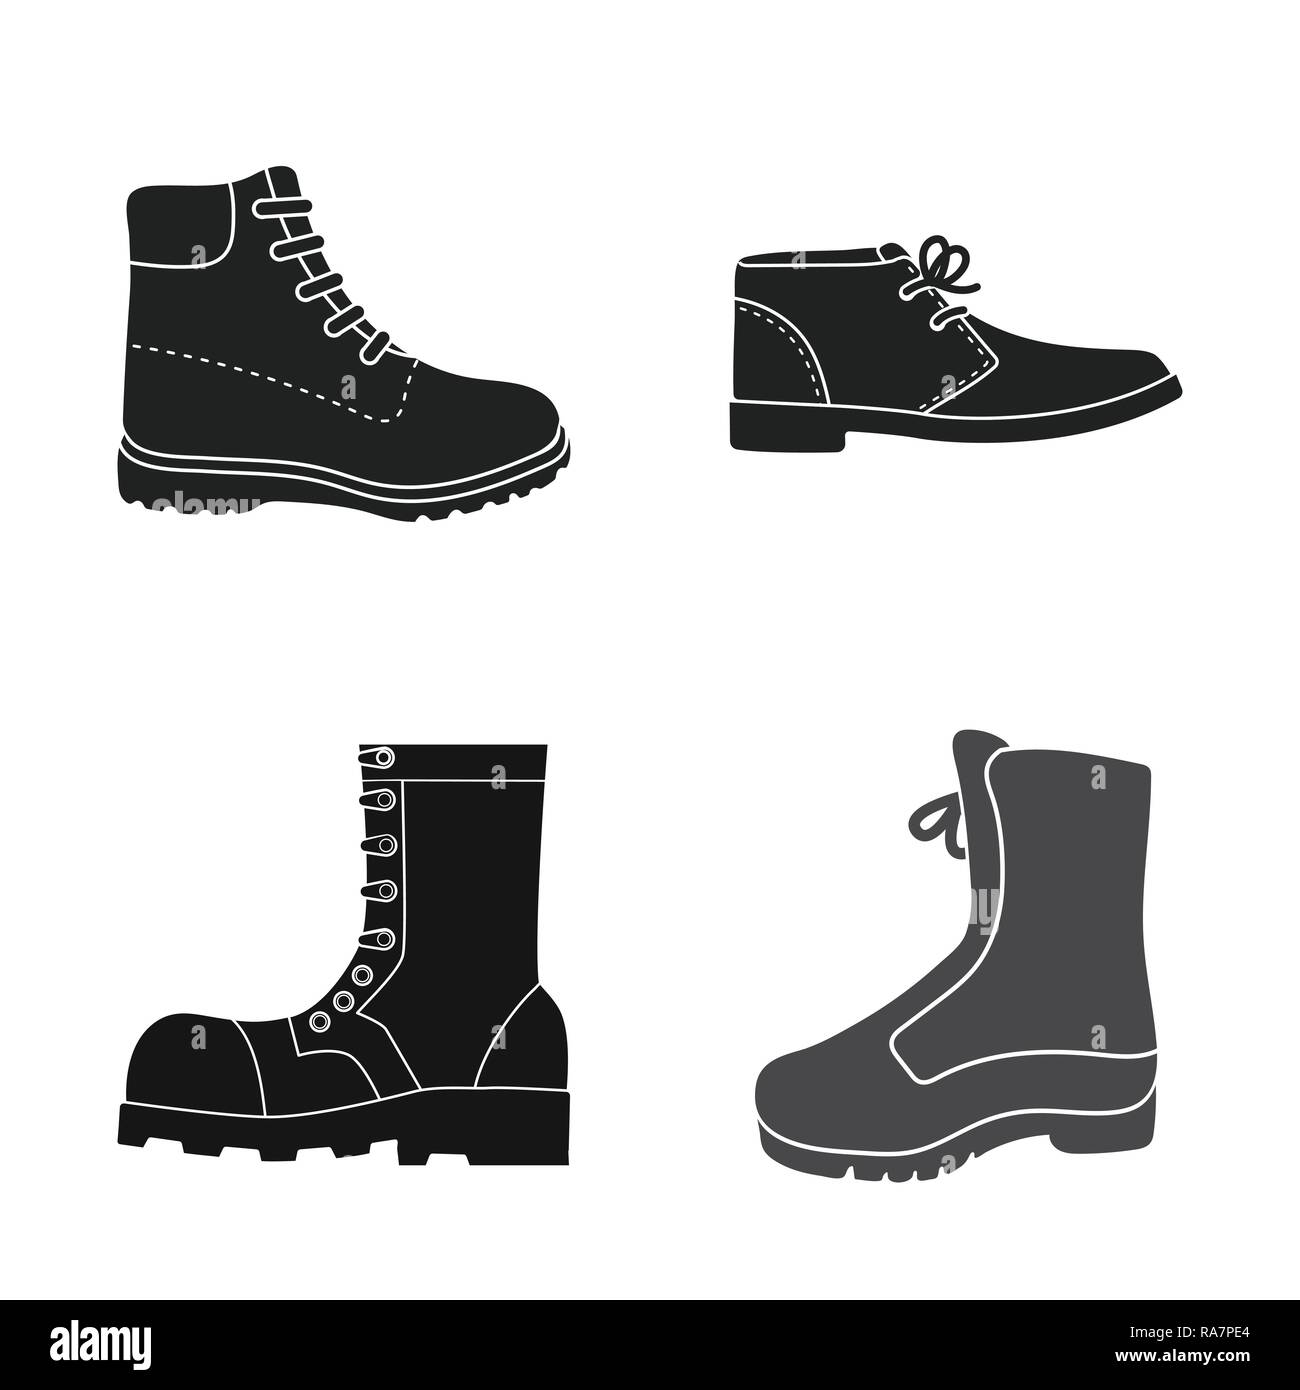 boot,shoe,shoelaces,silhouette,leather,casual,footwear,formal,combat ...